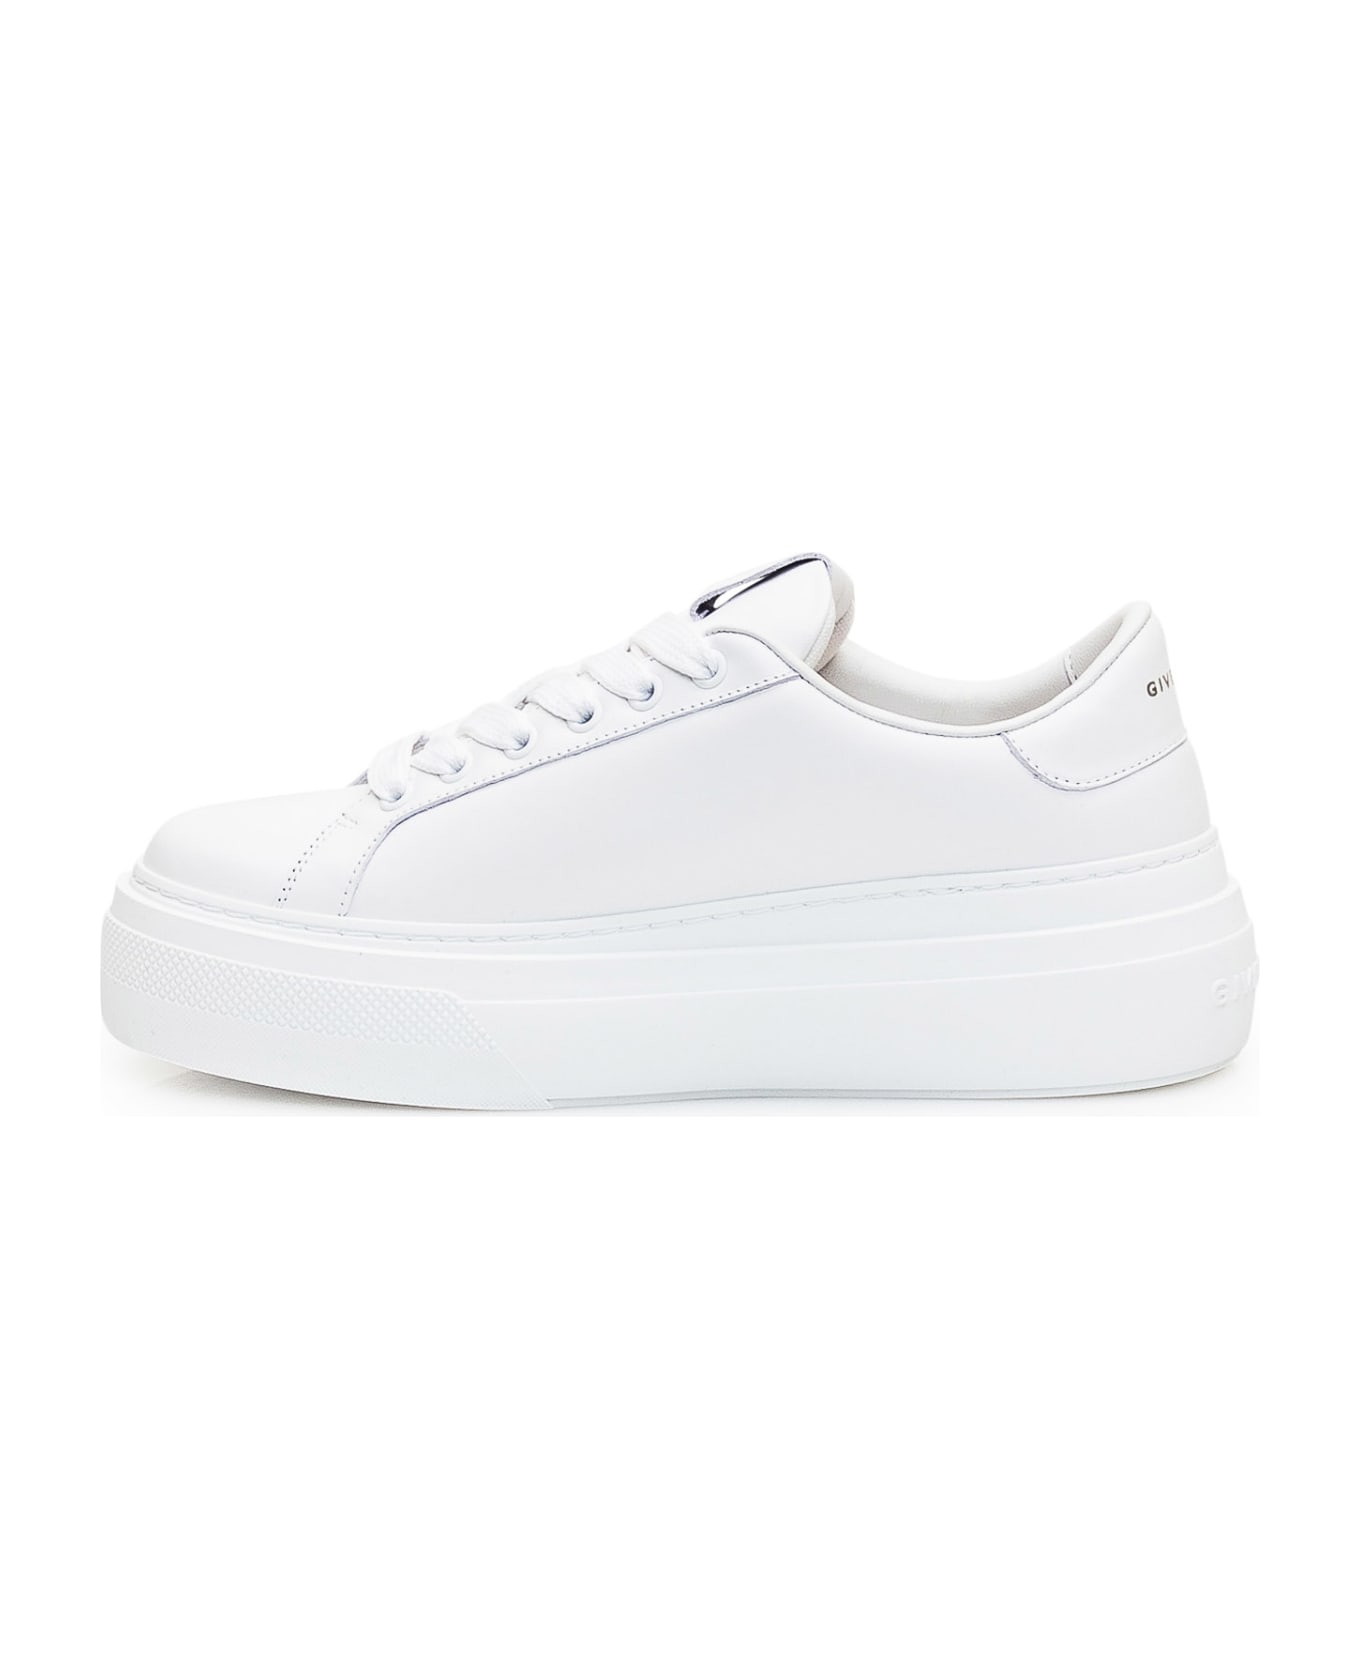 Givenchy City Platform Sneakers - WHITE